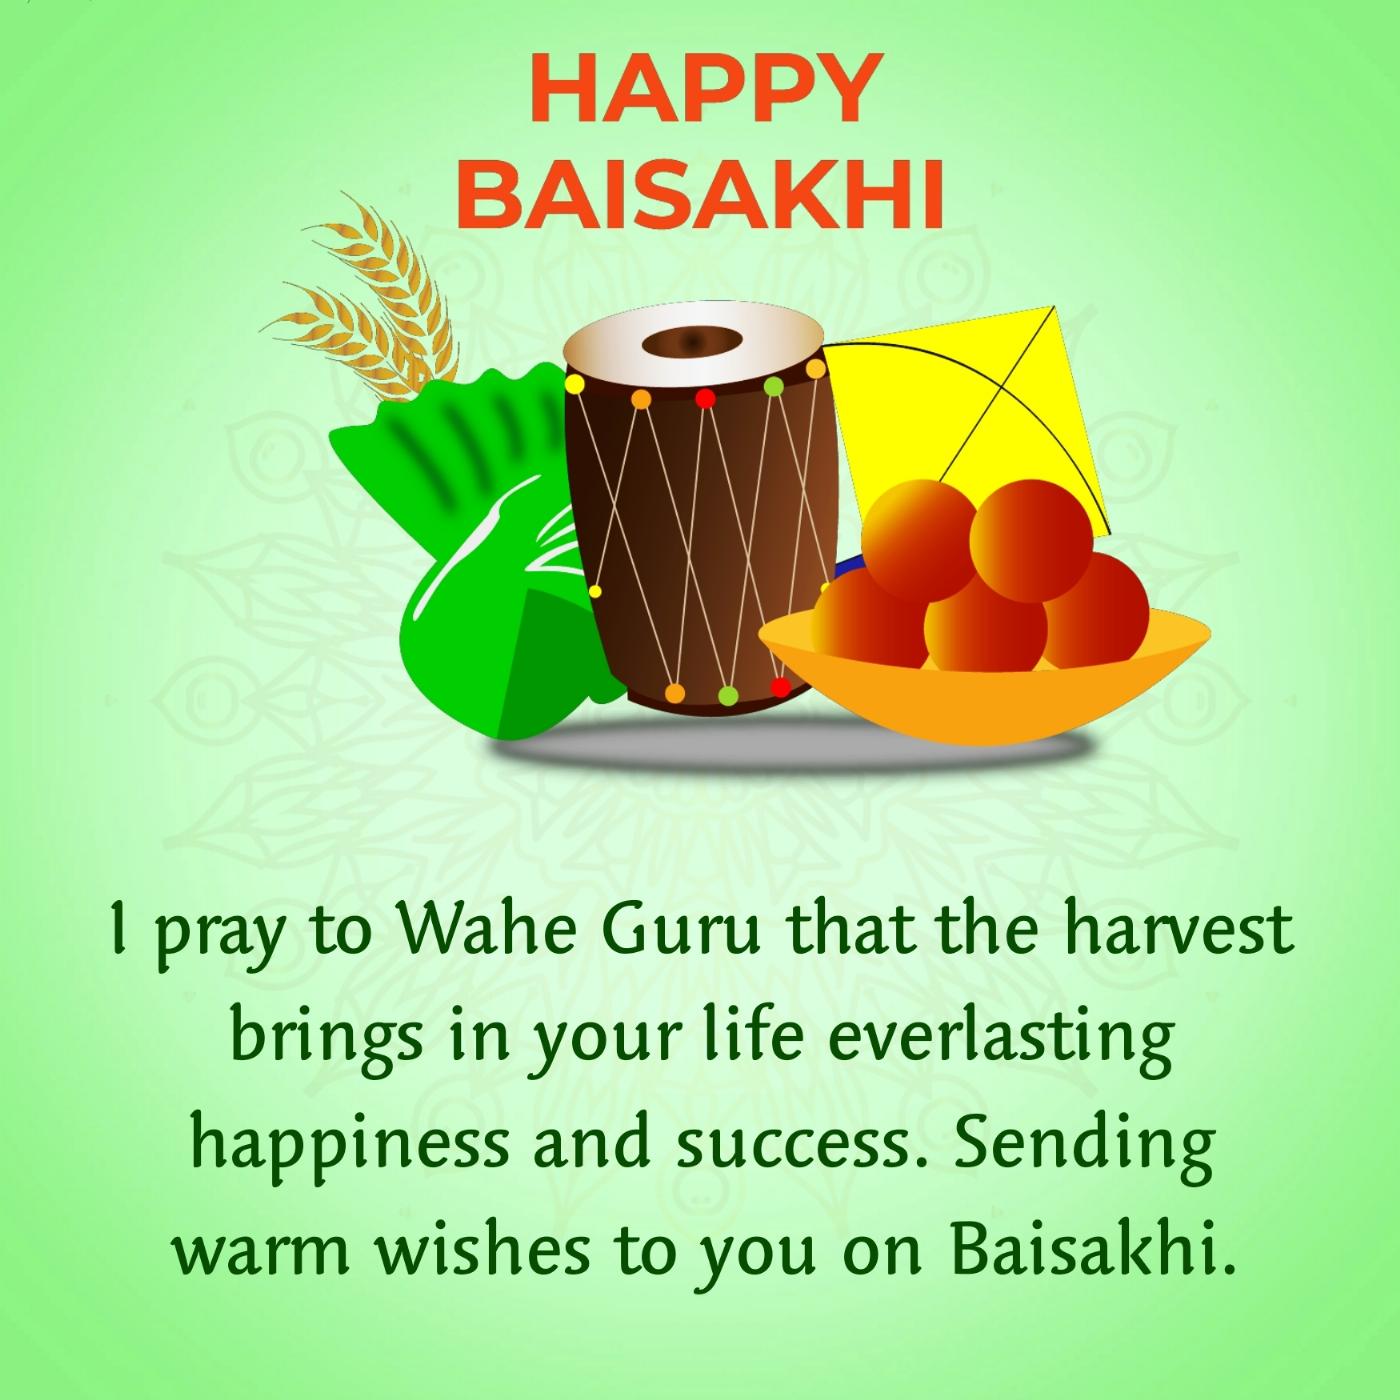 I pray to Wahe Guru that the harvest brings in your life